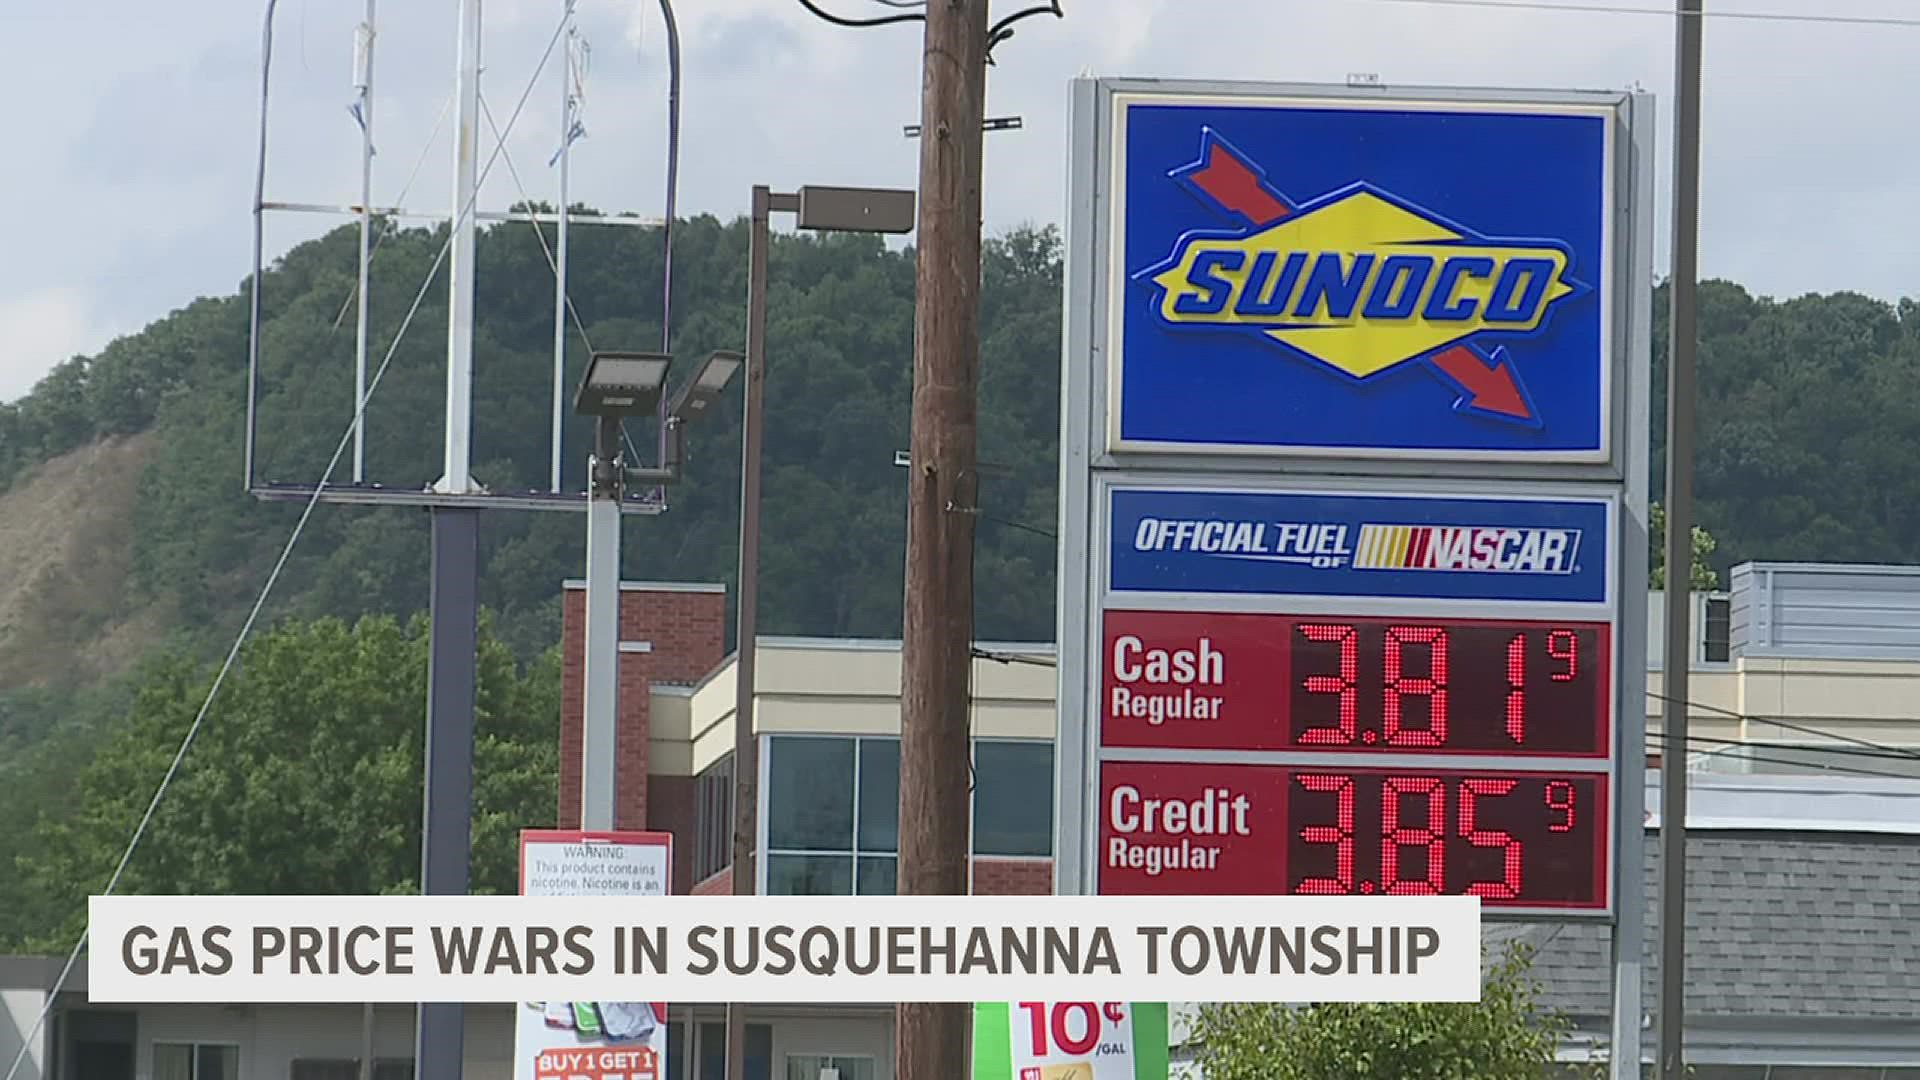 Three gas stations in Susquehanna Township are selling gas below $4.00/gallon to draw in more customers.